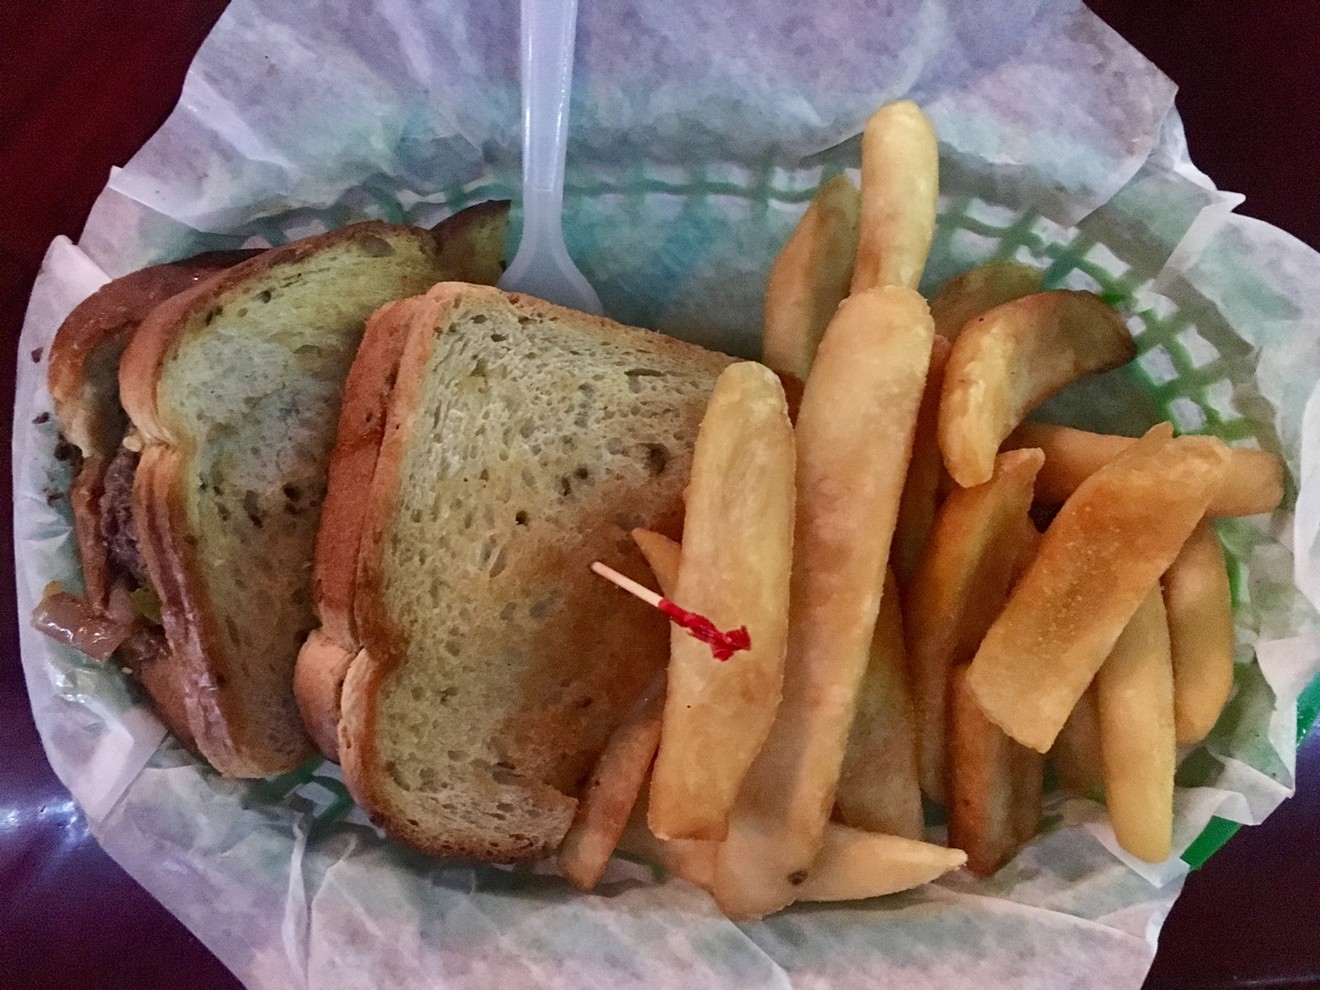 Milo's Penny Melt, a griddled beef sandwich with melted Swiss and onions, on buttered rye for $6.99.